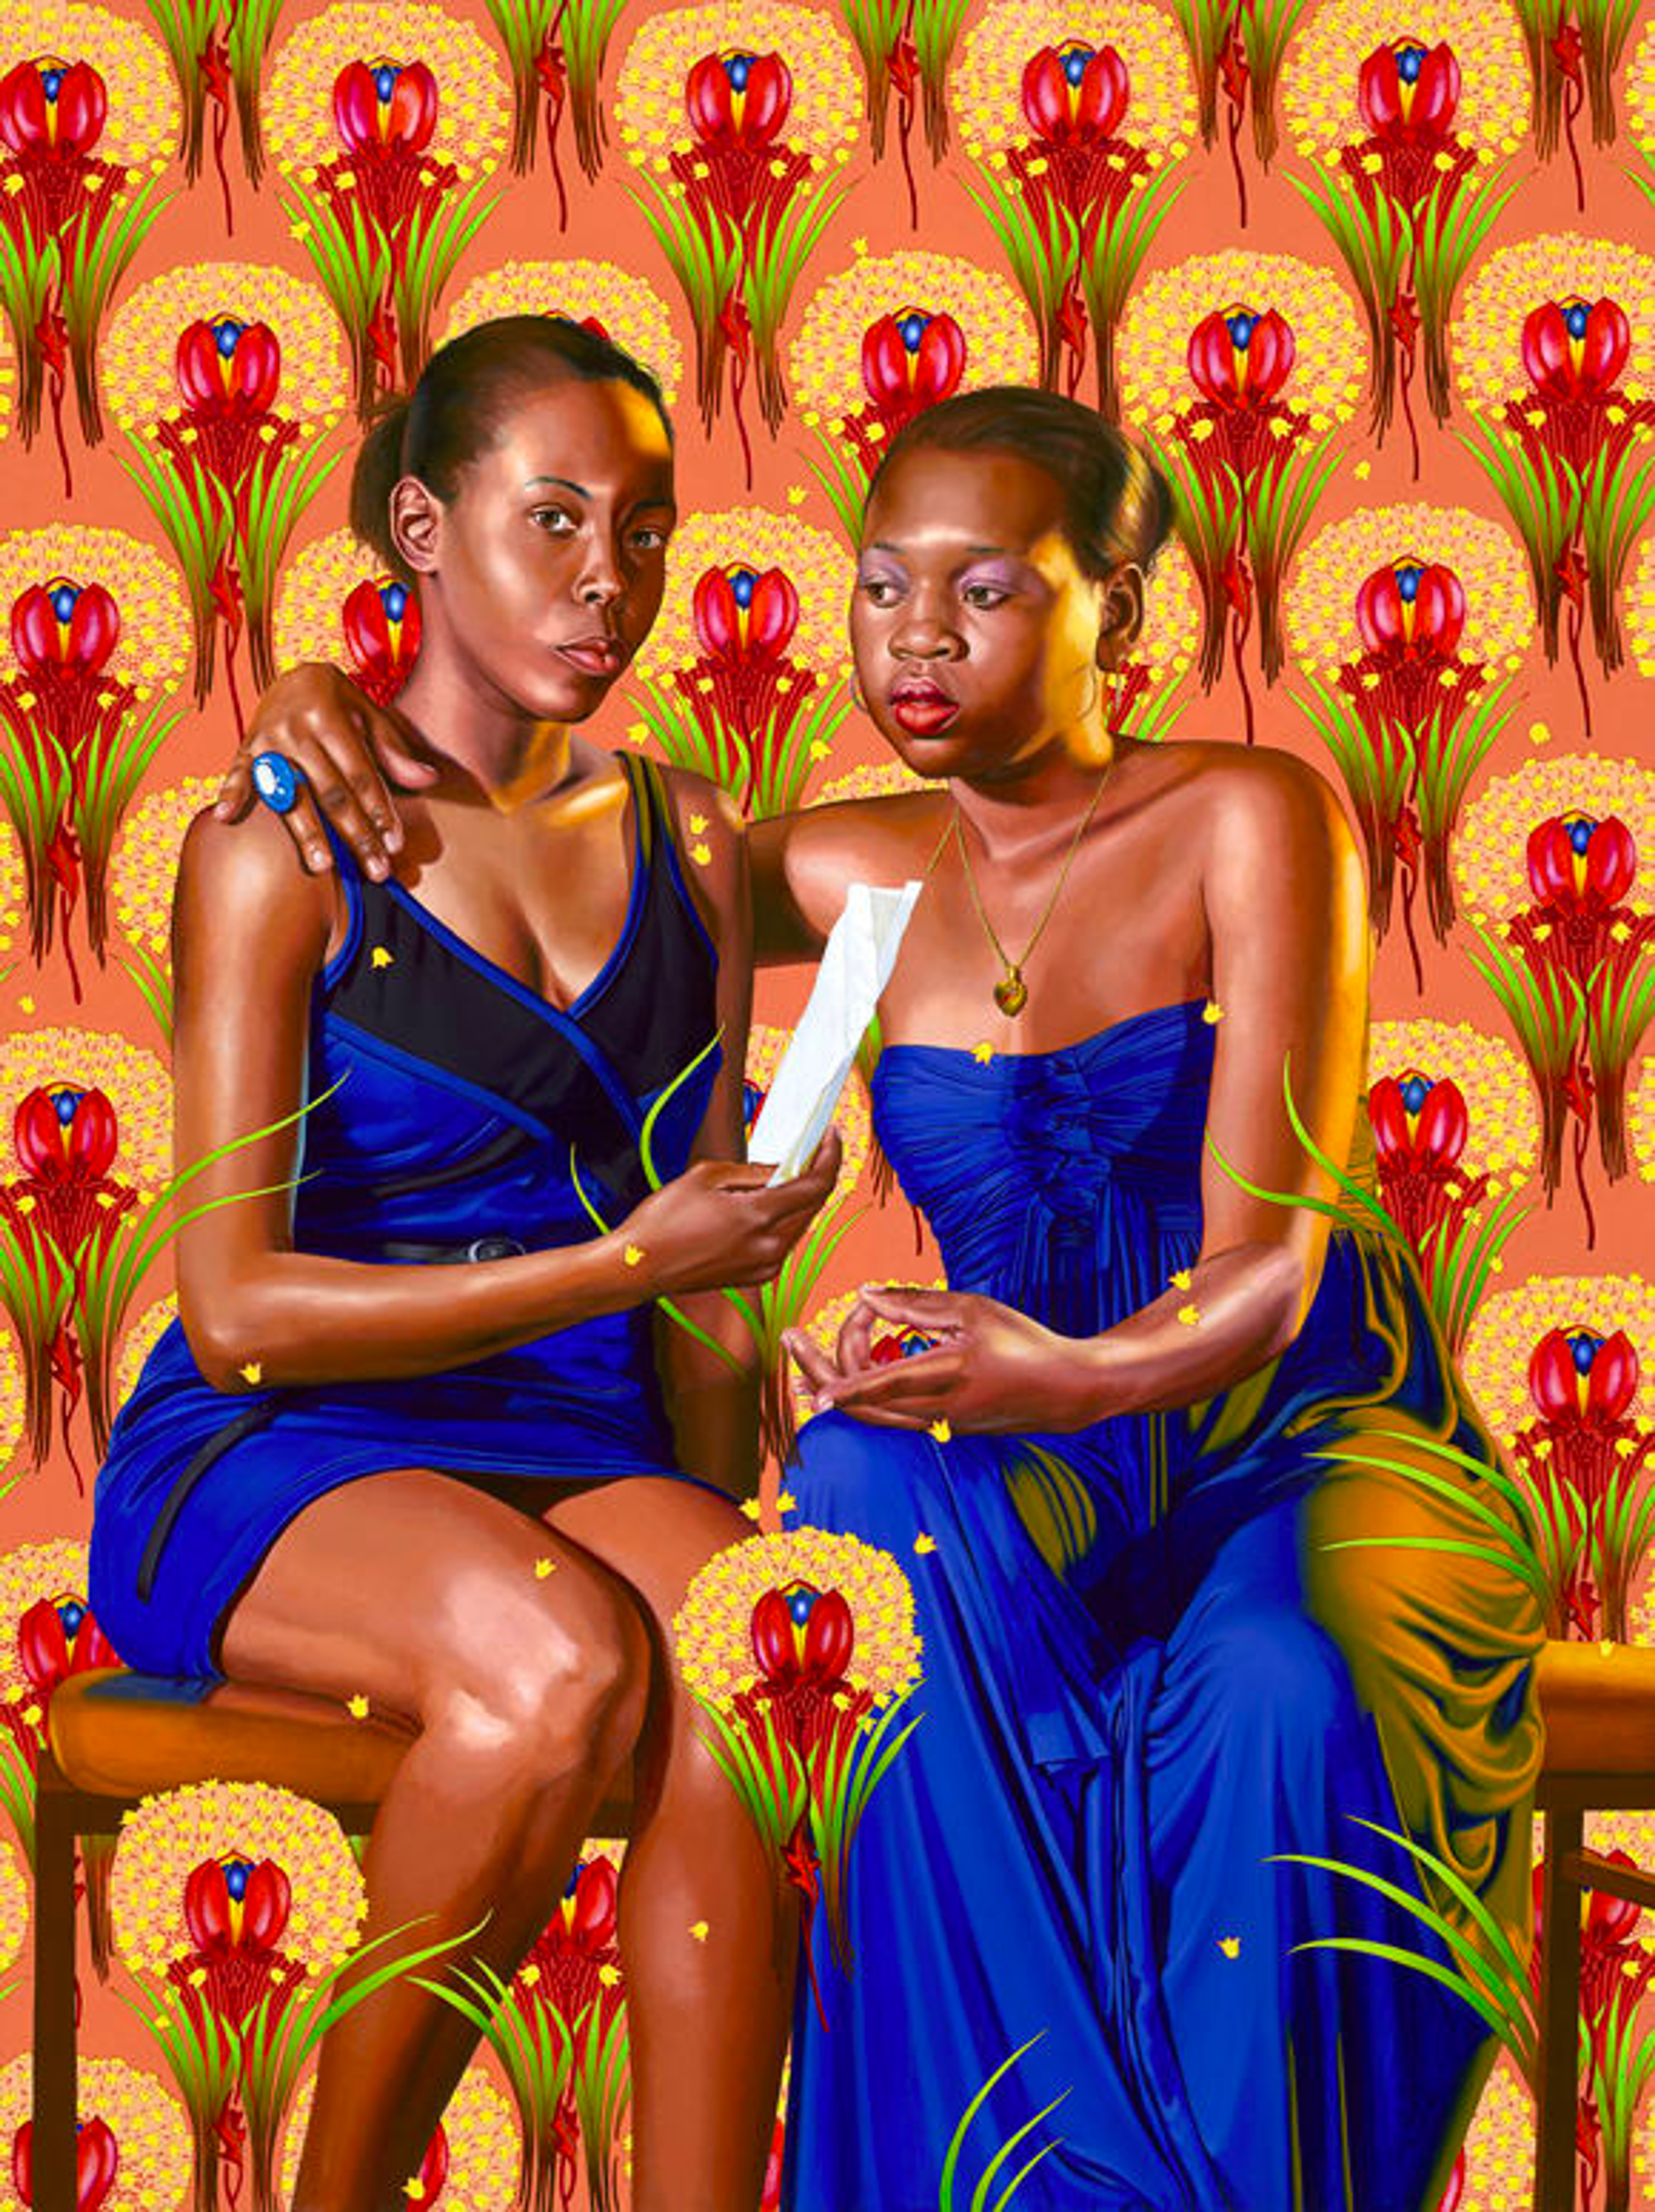 Two black women seated, one facing the viewer, the other looking at a scroll held by the woman on the right. They embrace with the woman on the right's arm around the other's shoulder. They wear blue dresses, seated against a vibrant orange backdrop with red floral wallpaper.